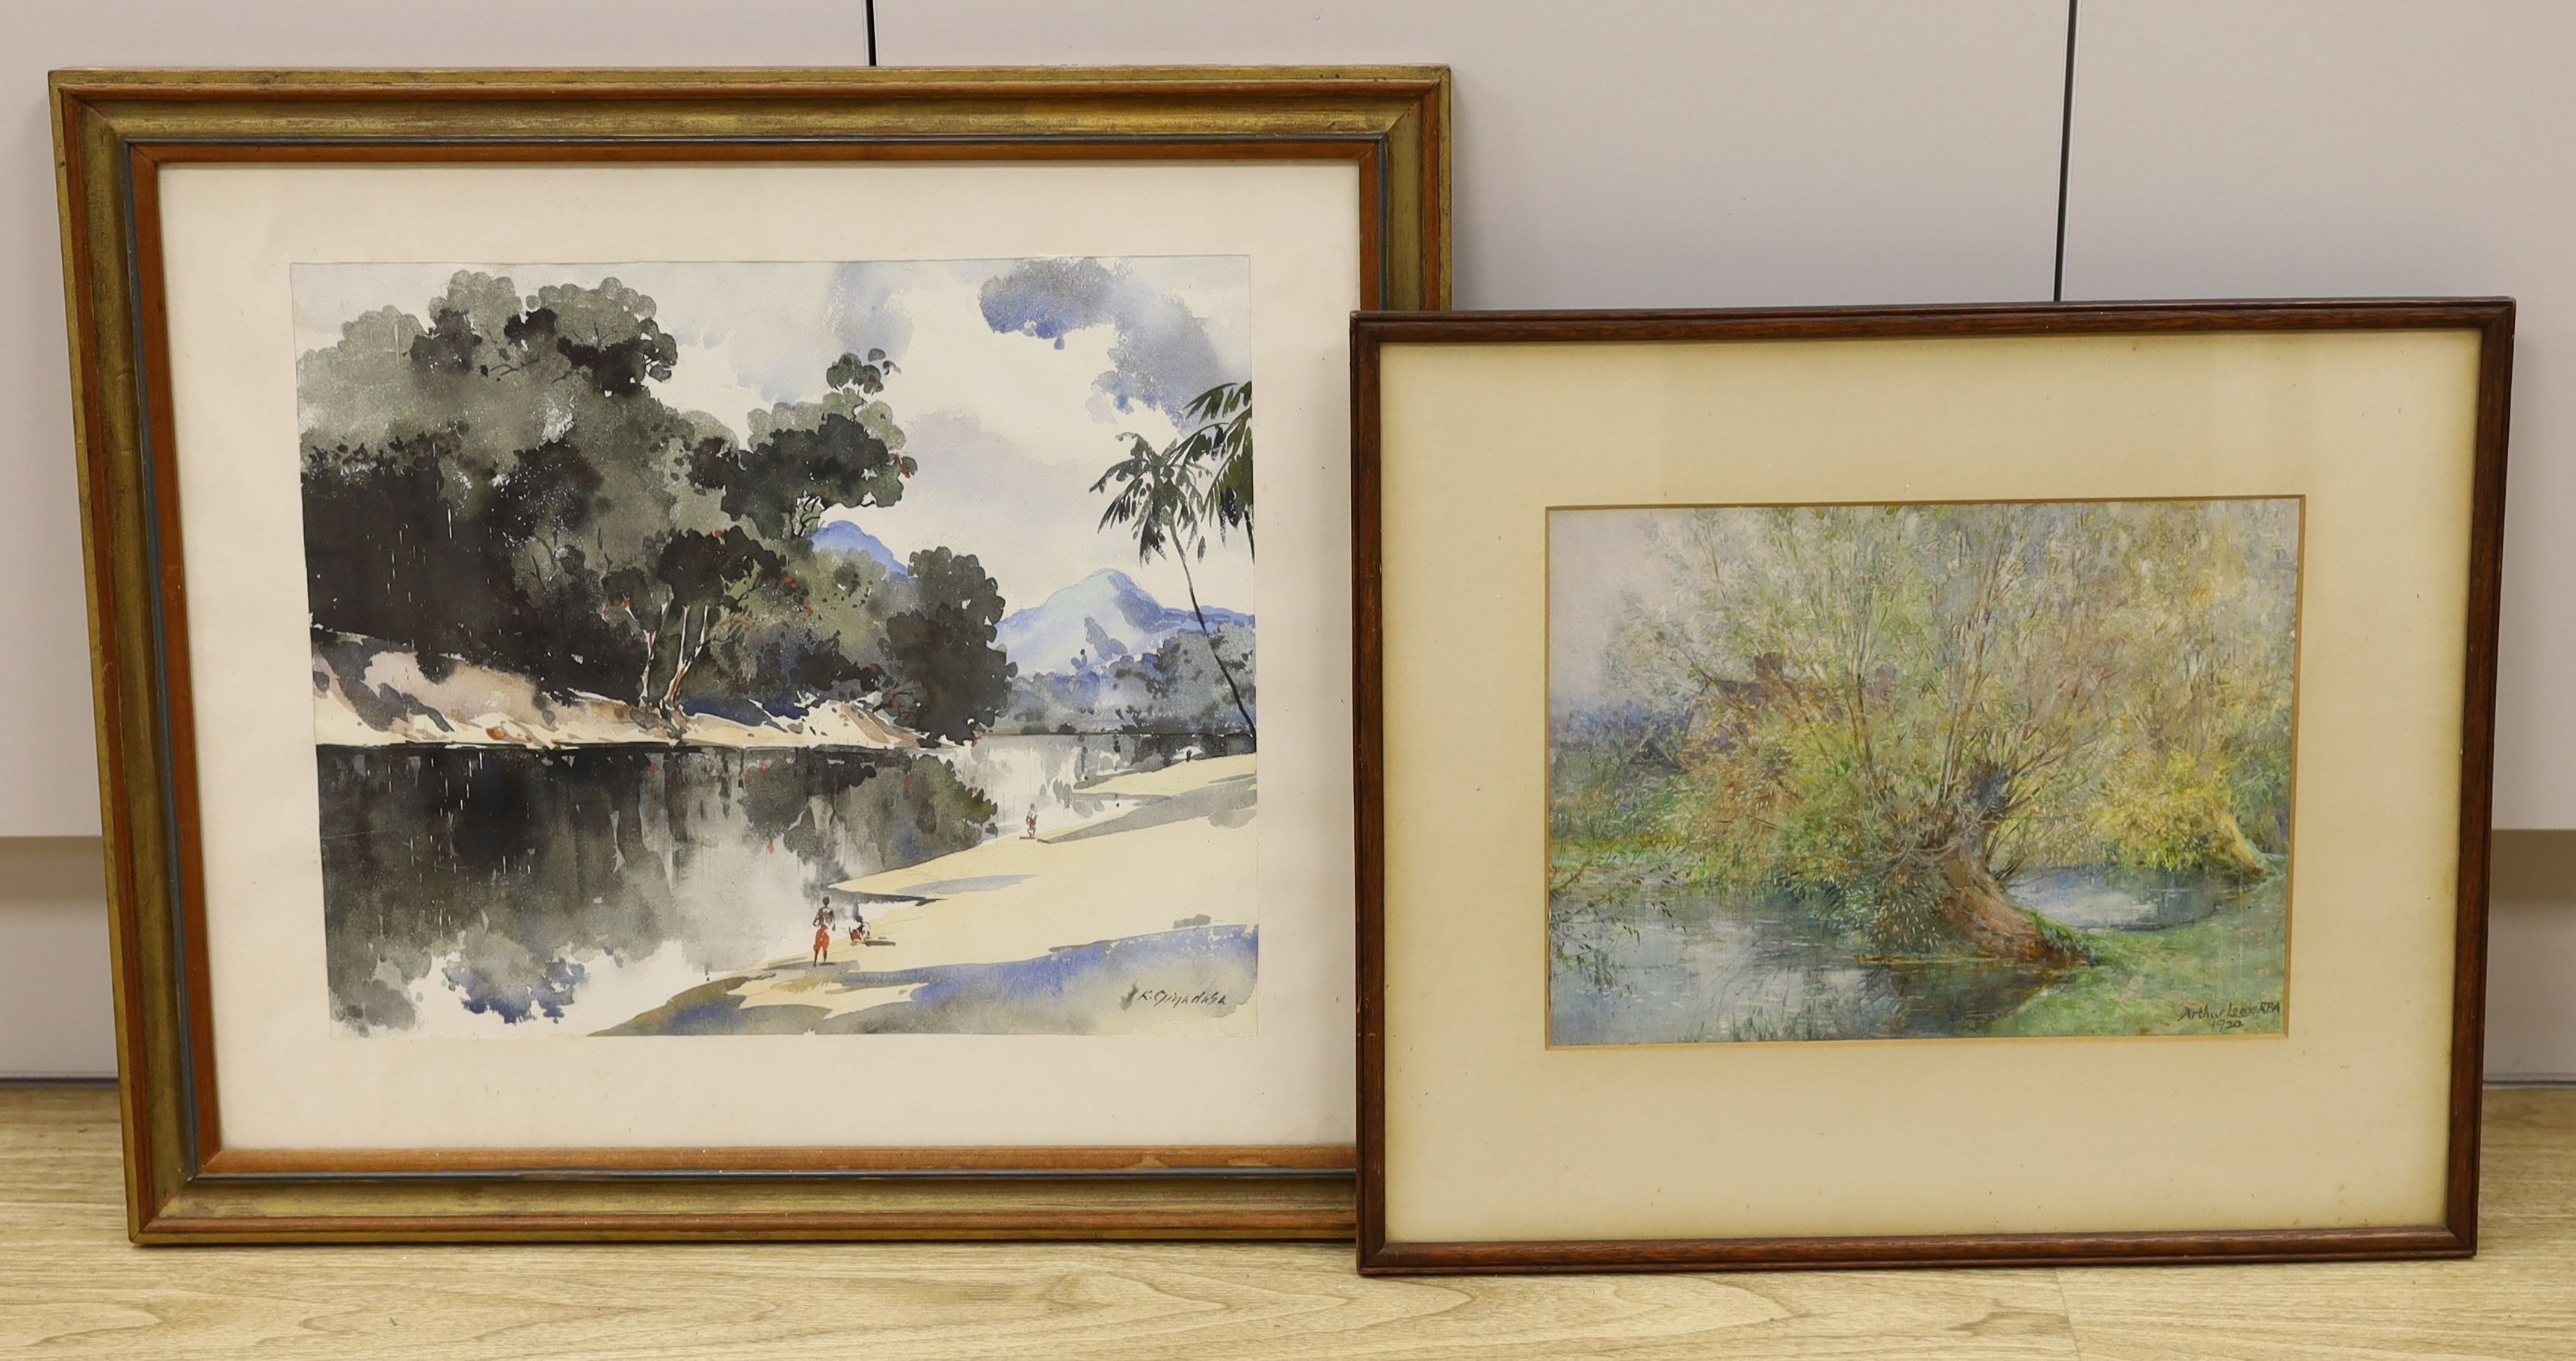 K. Piyadasa, watercolour, Asian river landscape, signed, 34 x 40cm and a watercolour of willow trees by Arthur Legge, dated 1920, 23 x 32cm